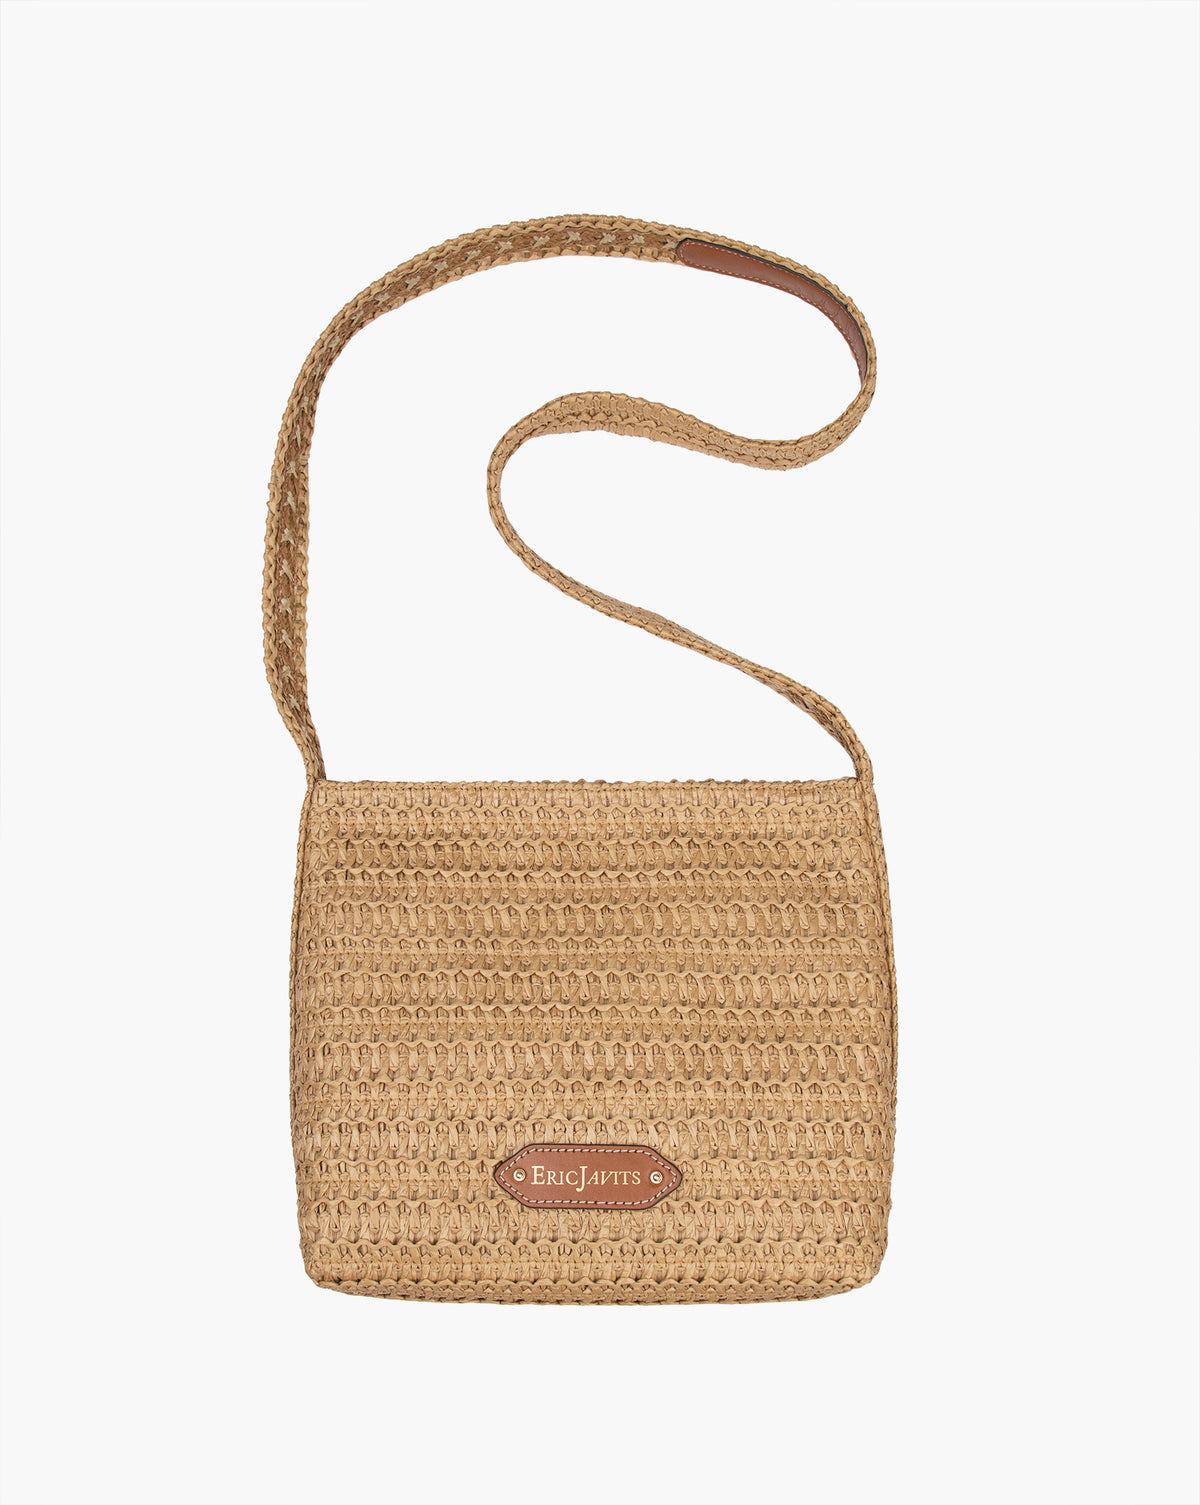 Designer Straw Beach Bags for Women for Sale | Eric Javits | Eric 